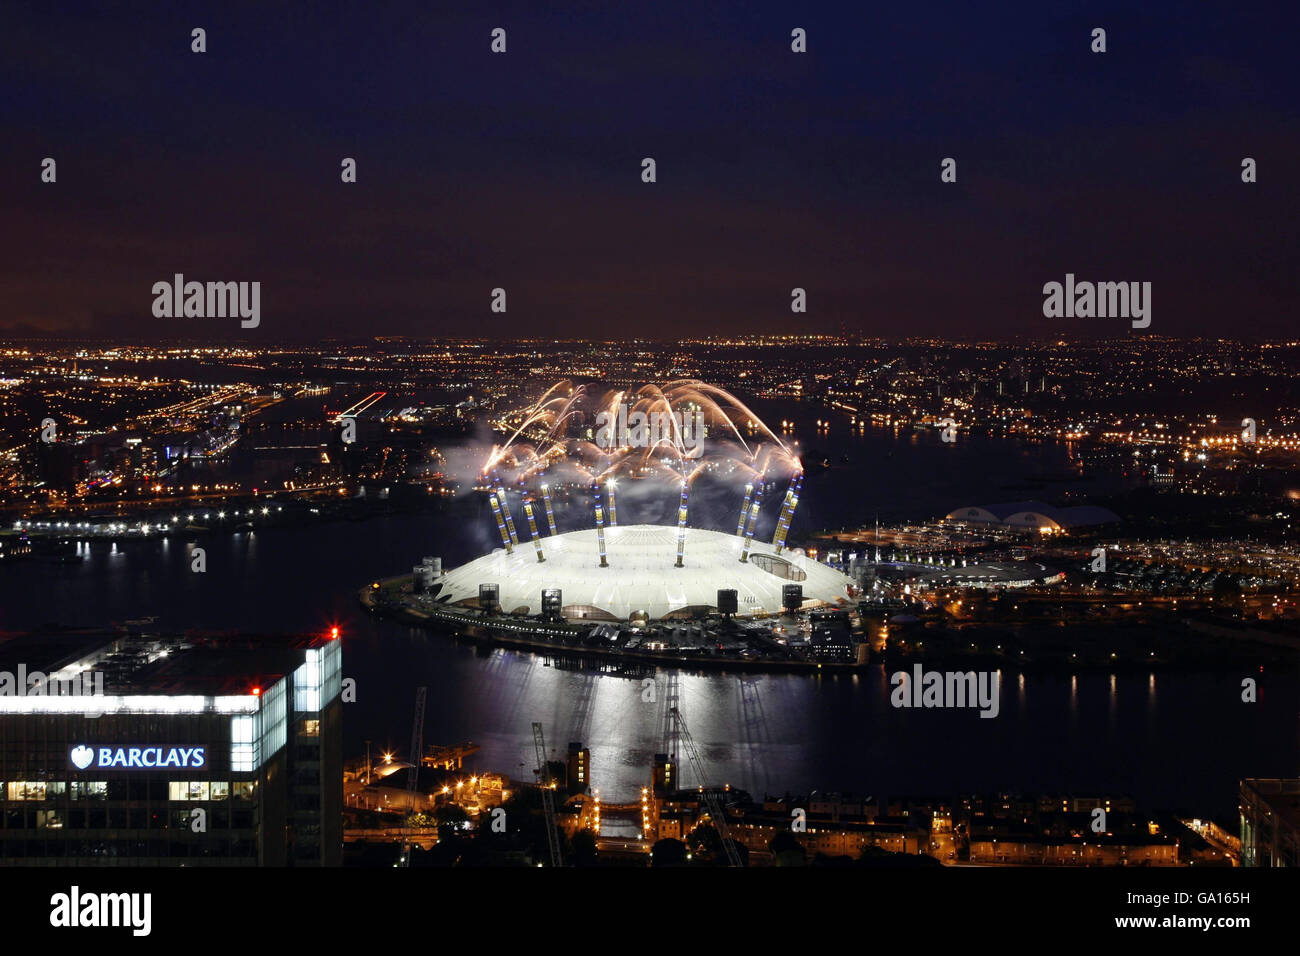 Fireworks are seen at the launch of the new O2 arena in Greenwich, London. Stock Photo